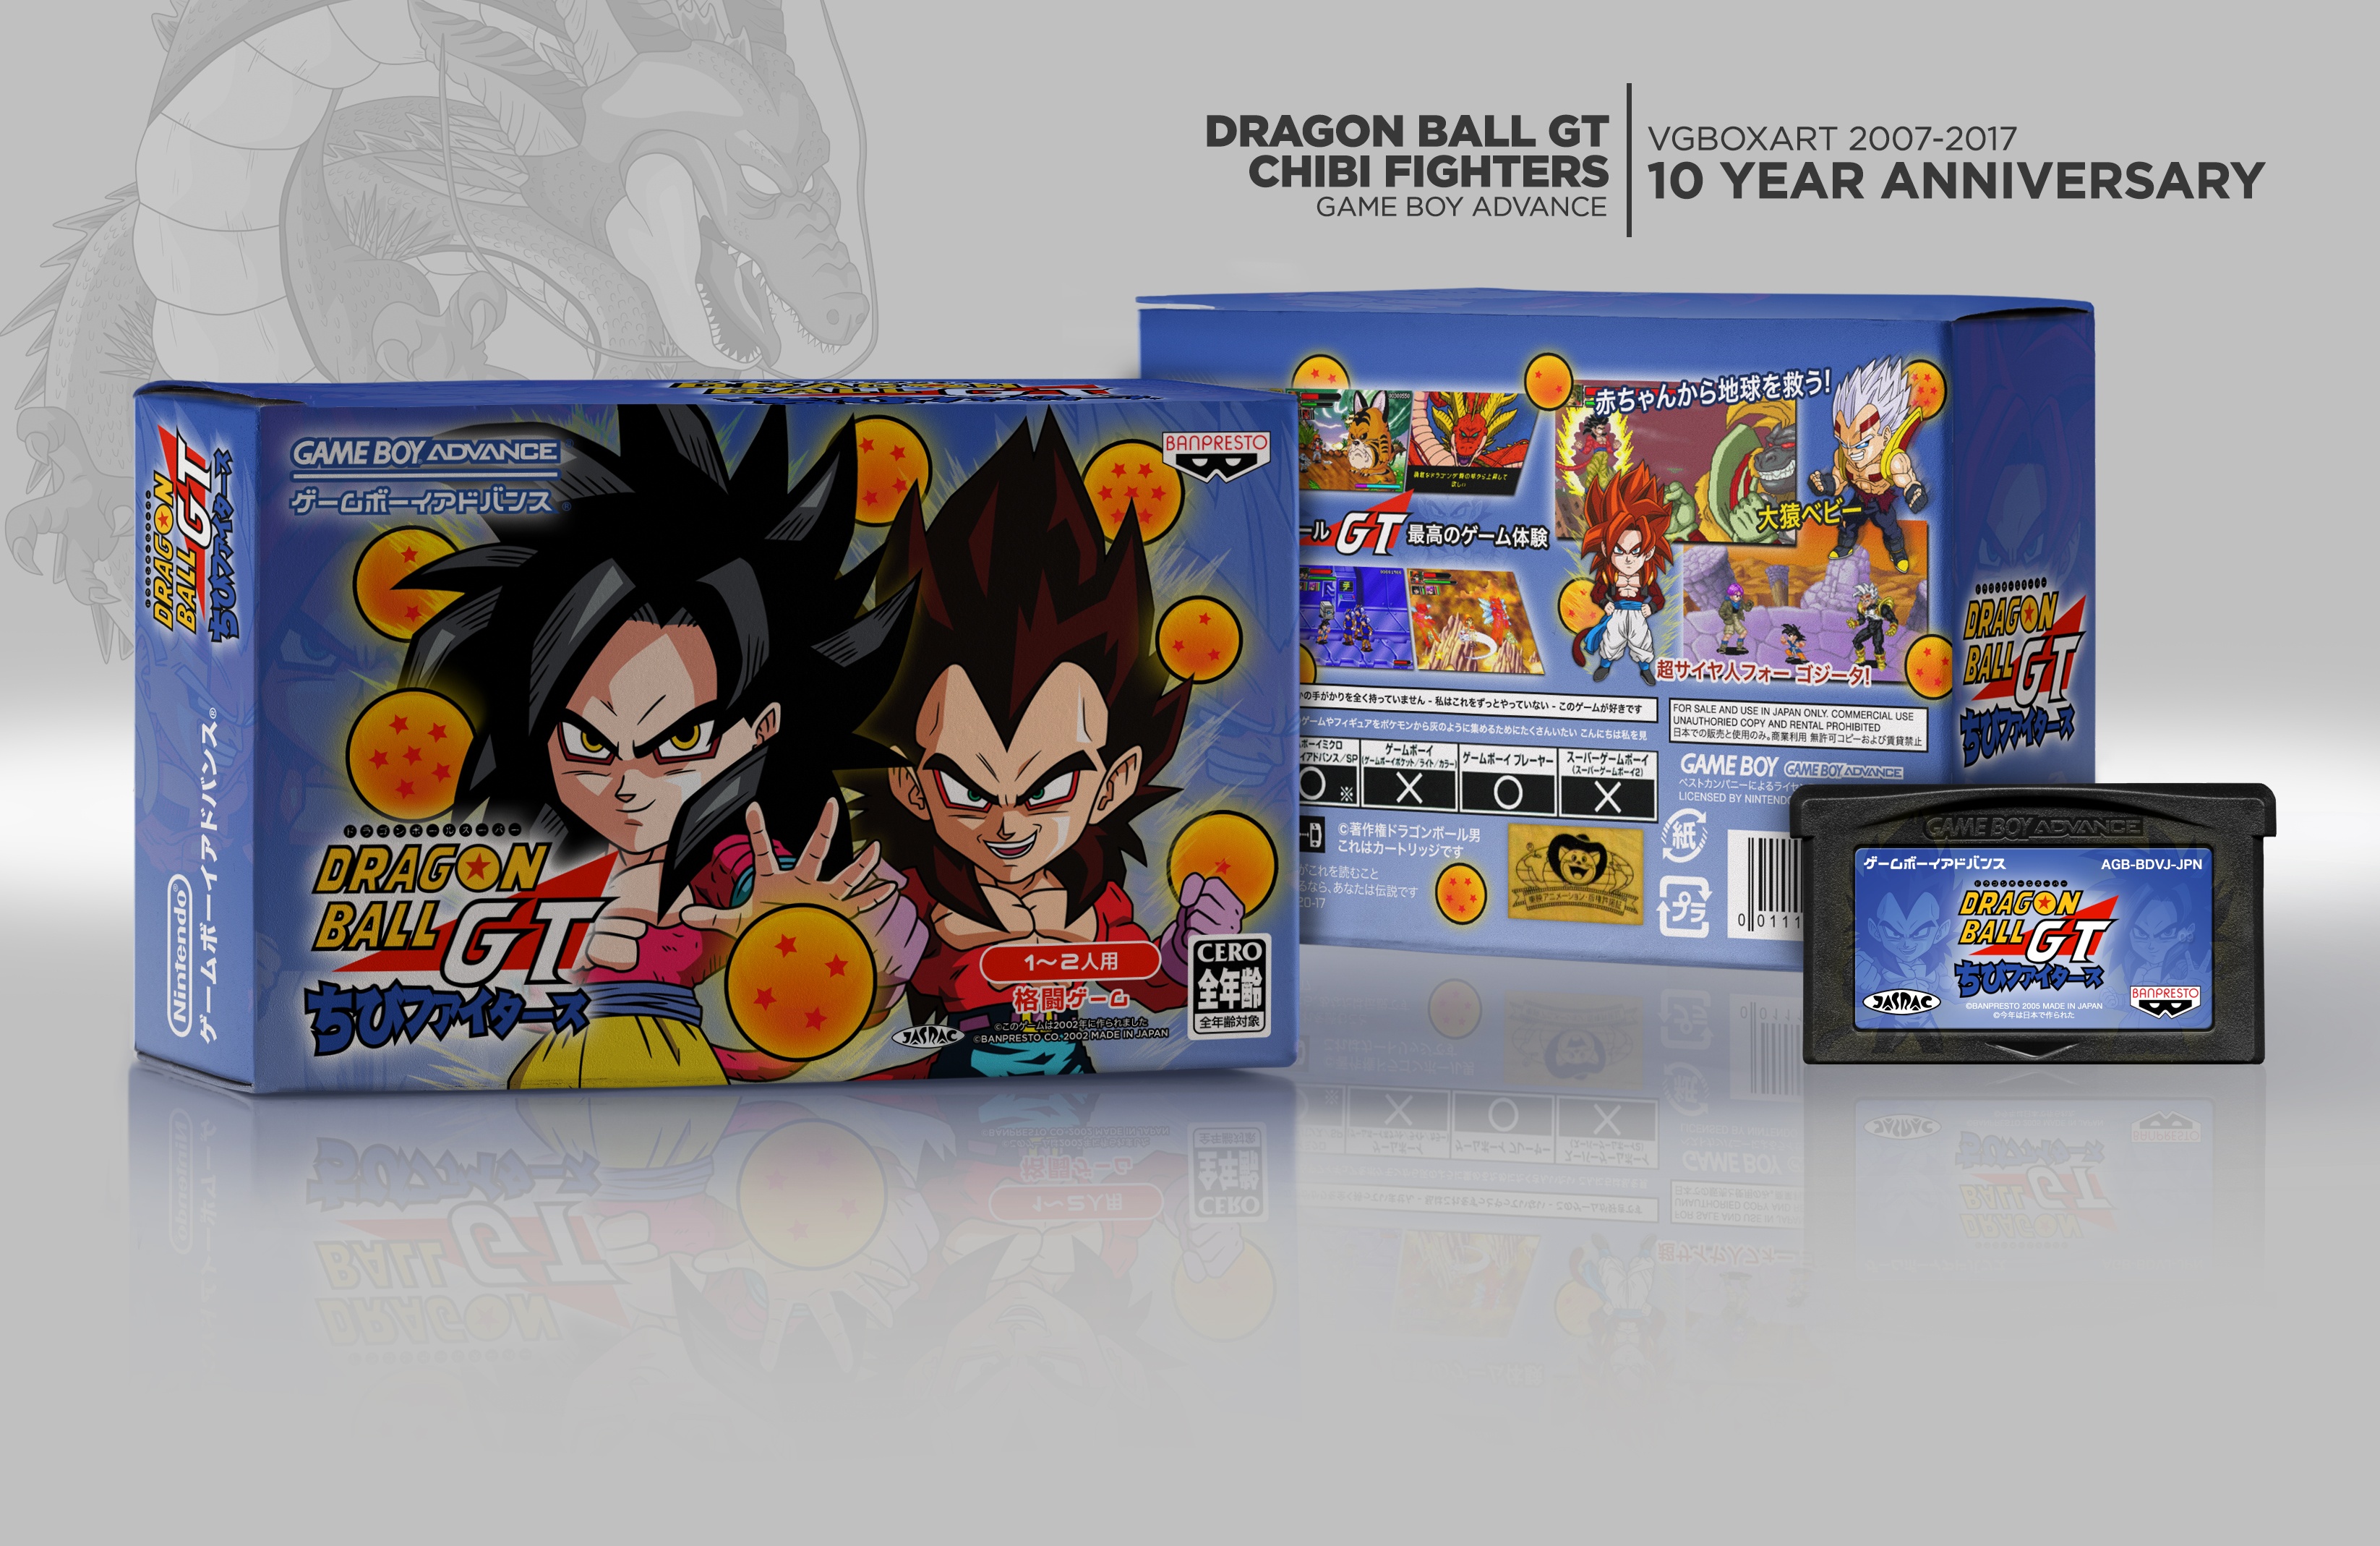 Dragon Ball GT: Chibi Fighters box cover